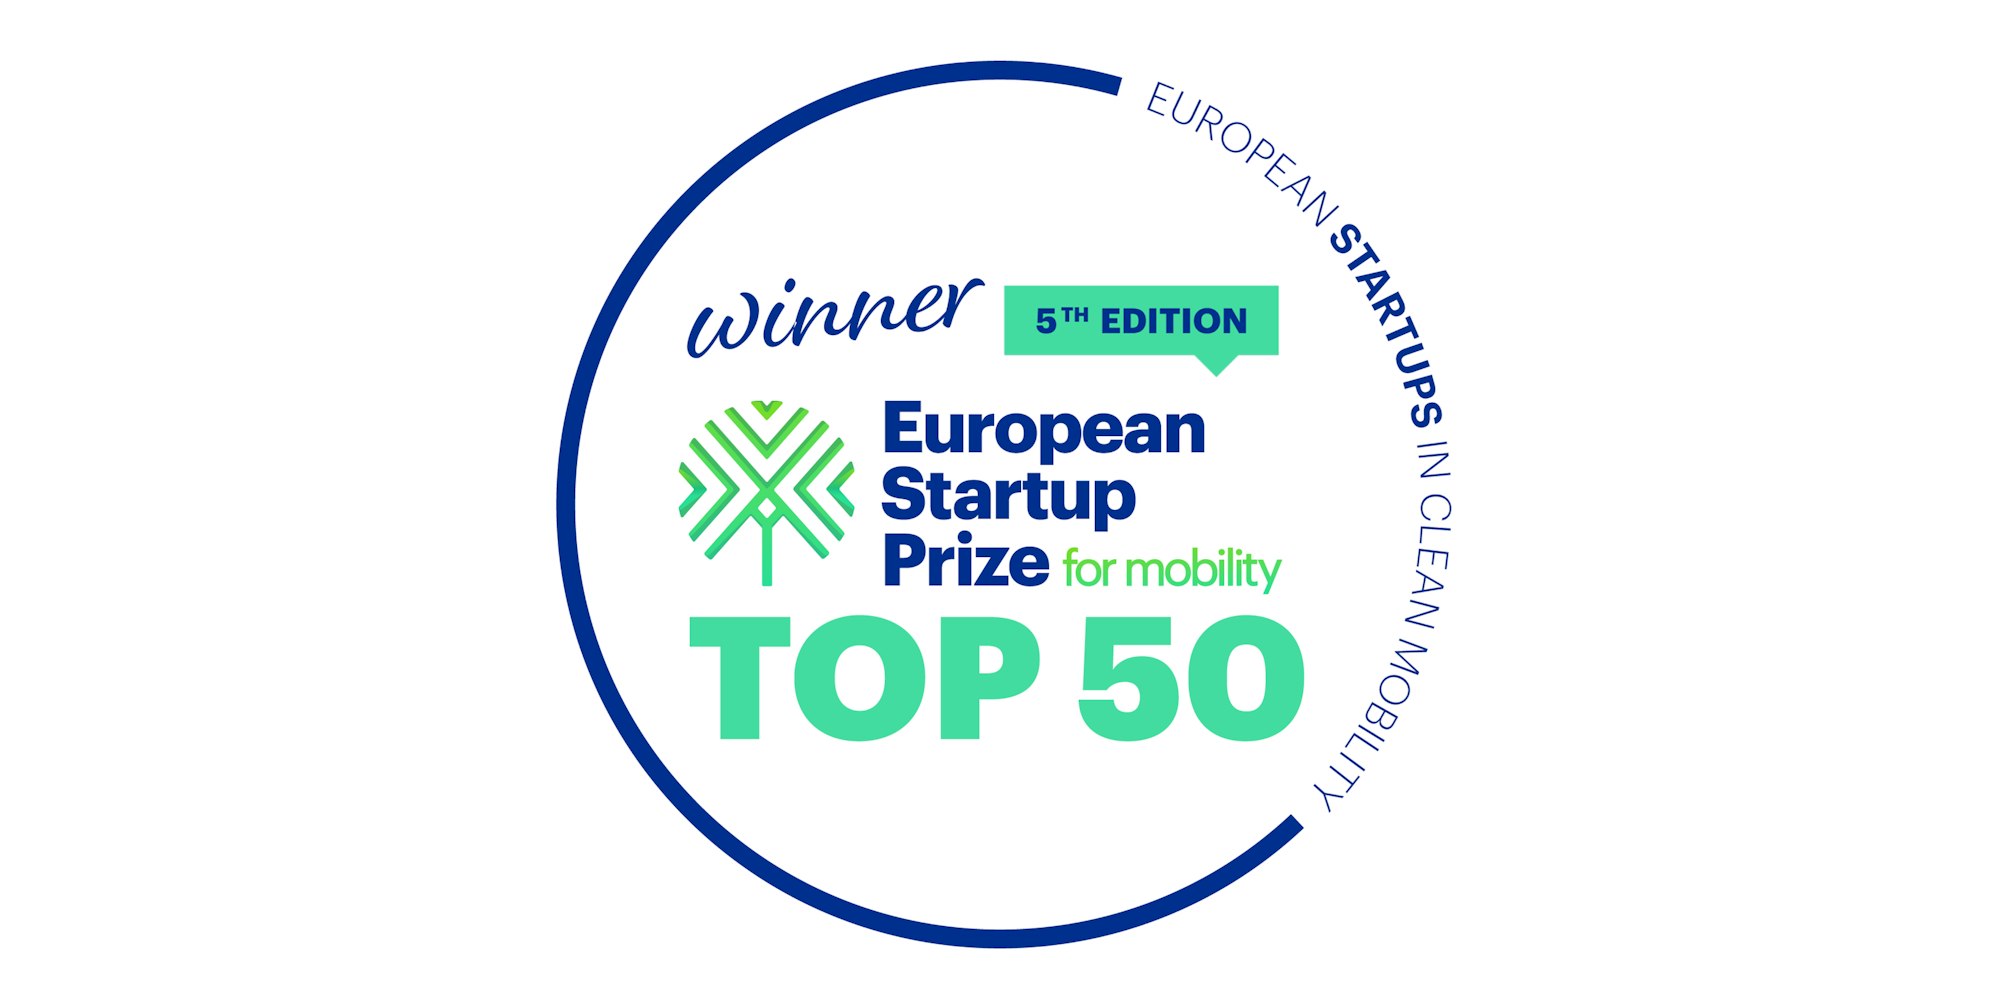 Cover Image for Papaya is one of the Top 50 finalists in the European Startup Prize for Mobility!